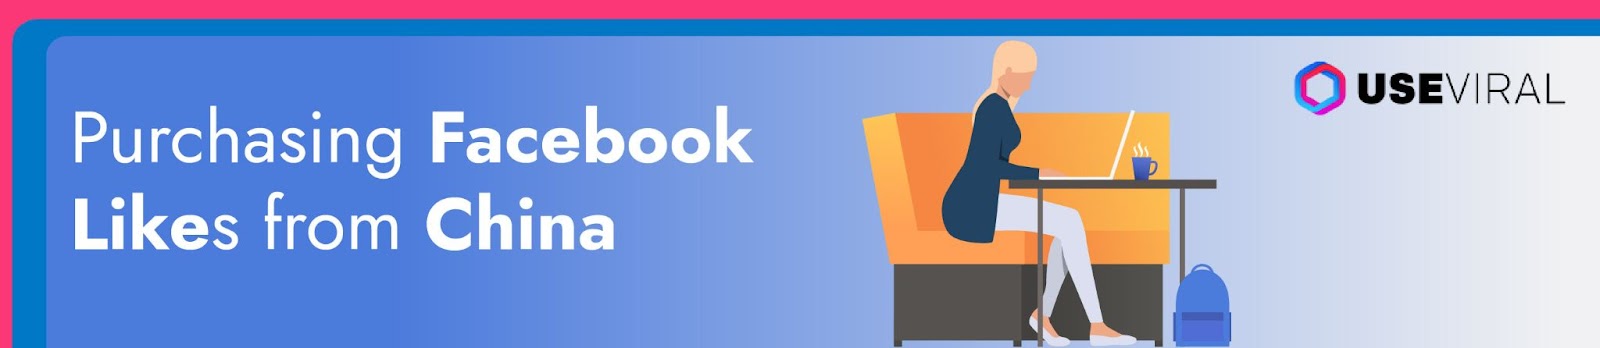  Purchasing Facebook Likes from China